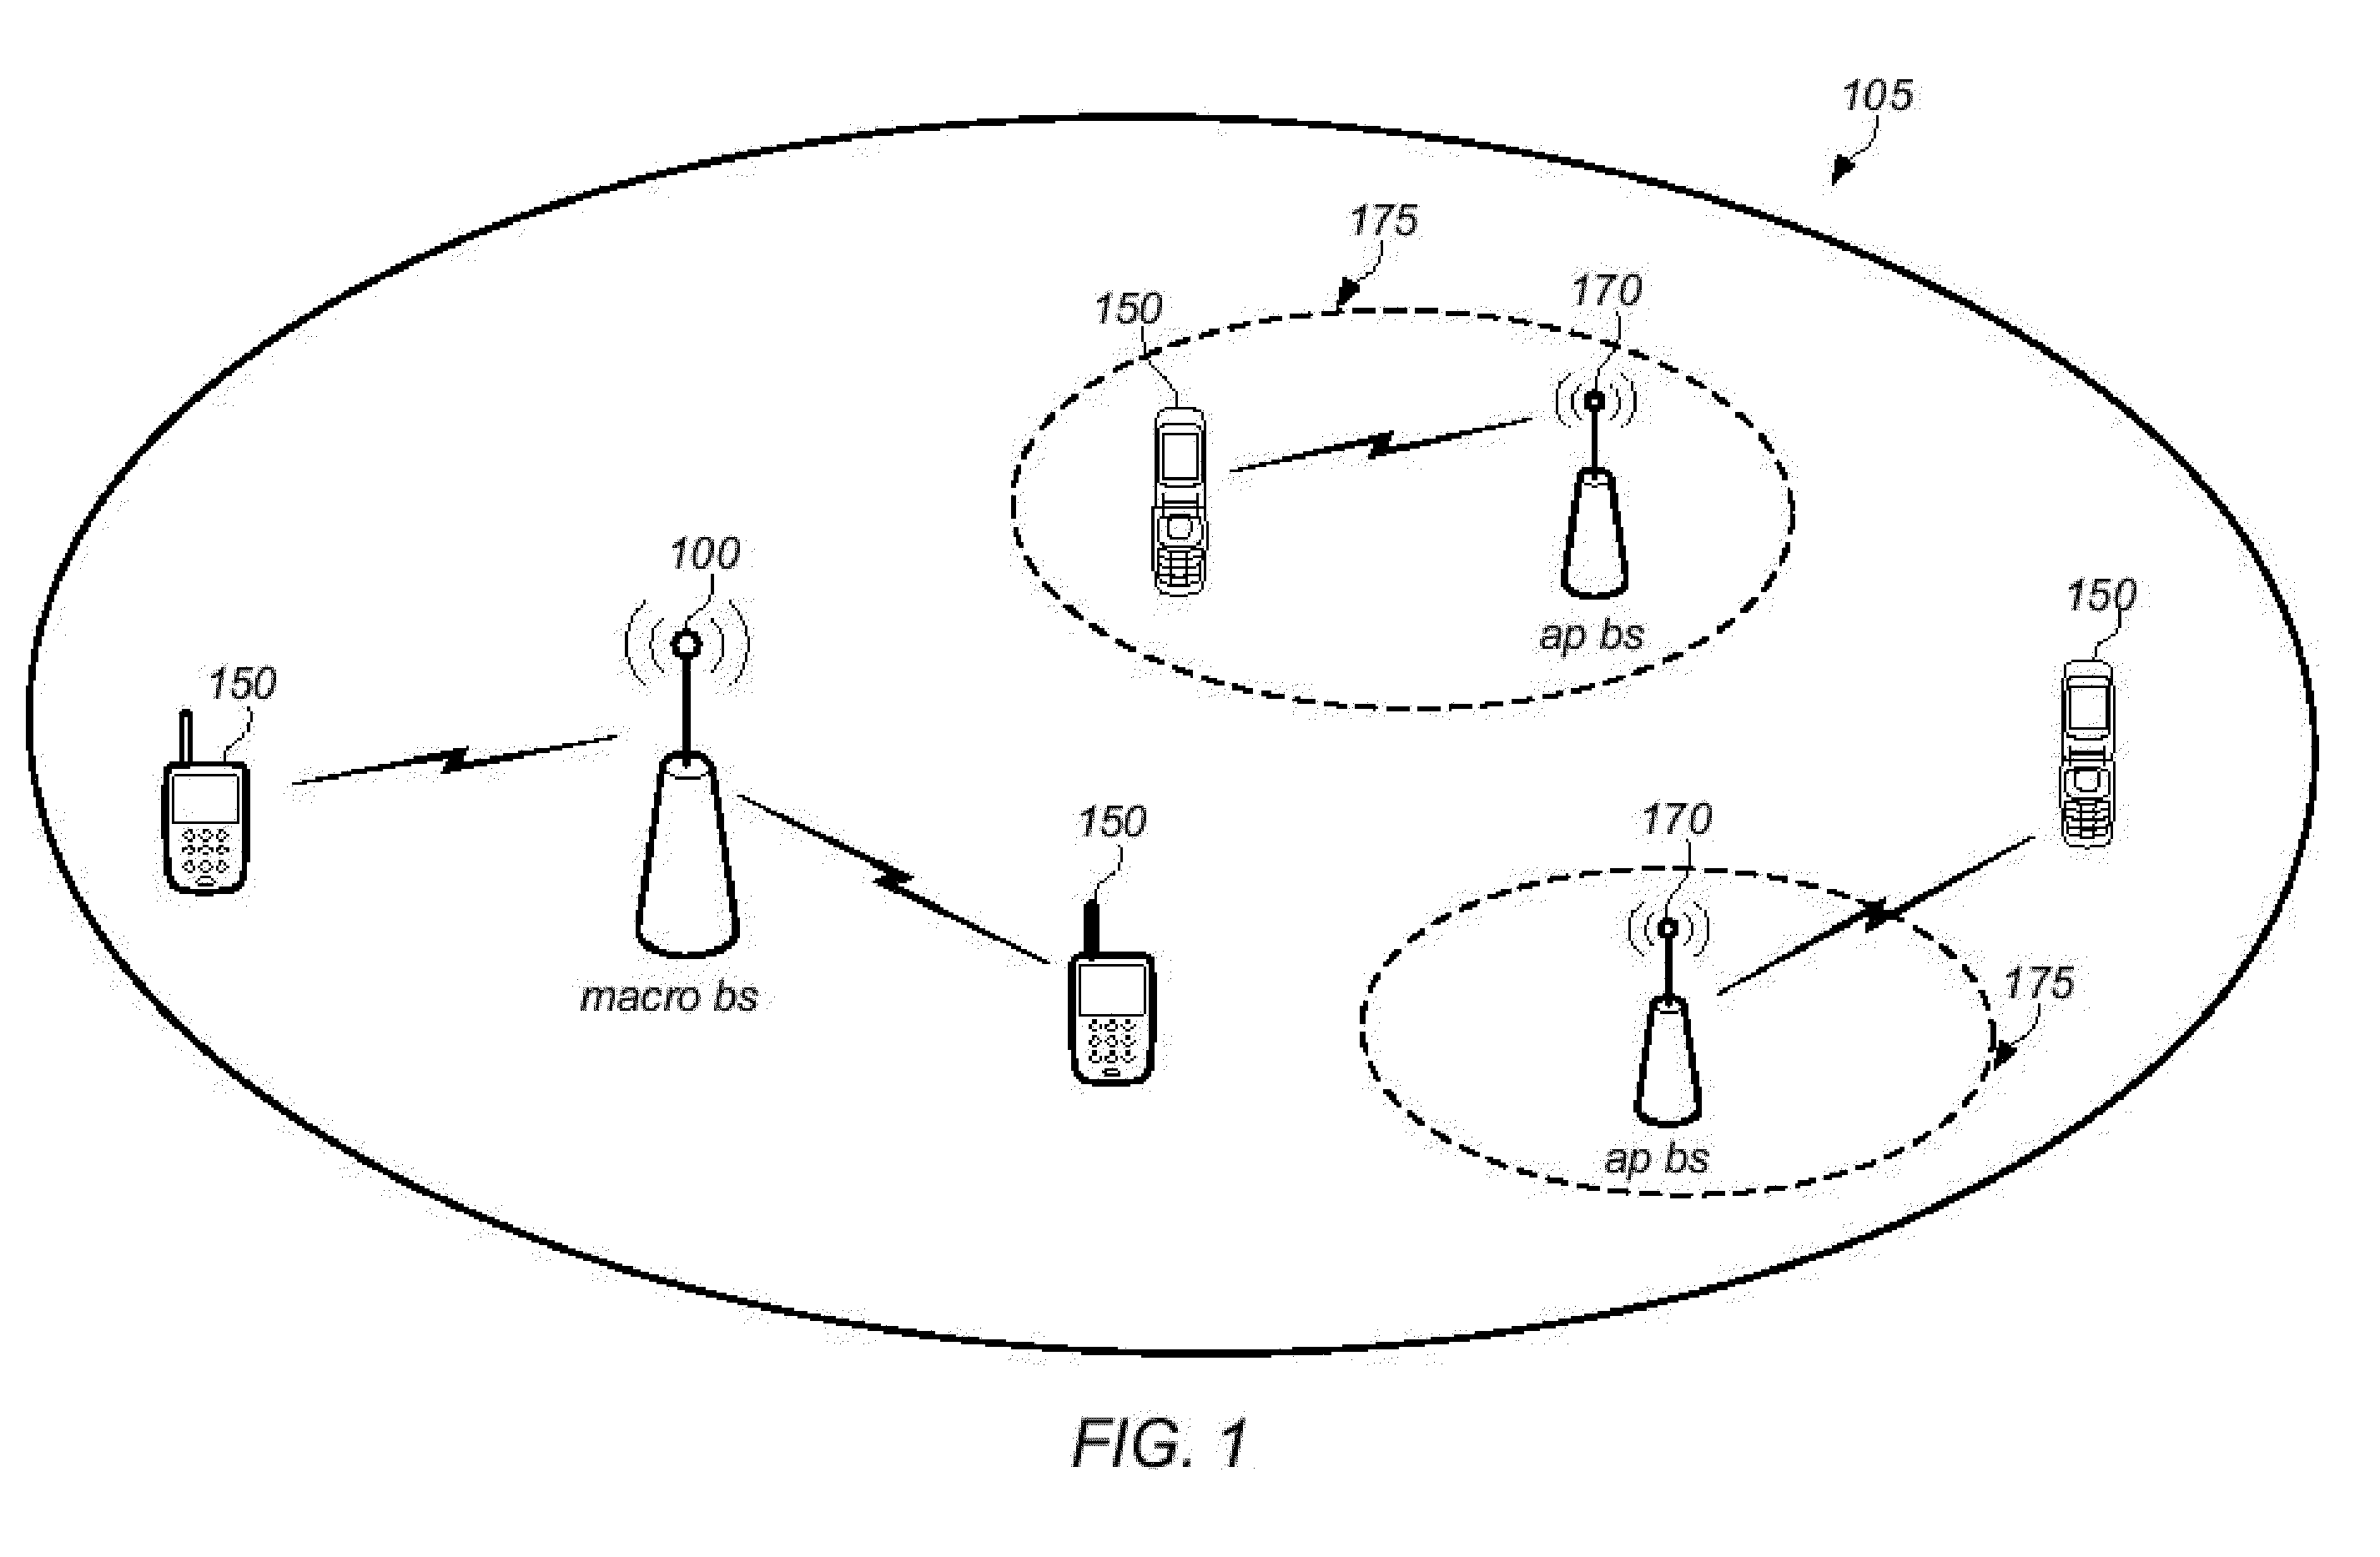 Simultaneous use of multiple phone numbers in mobile device by sharing hardware